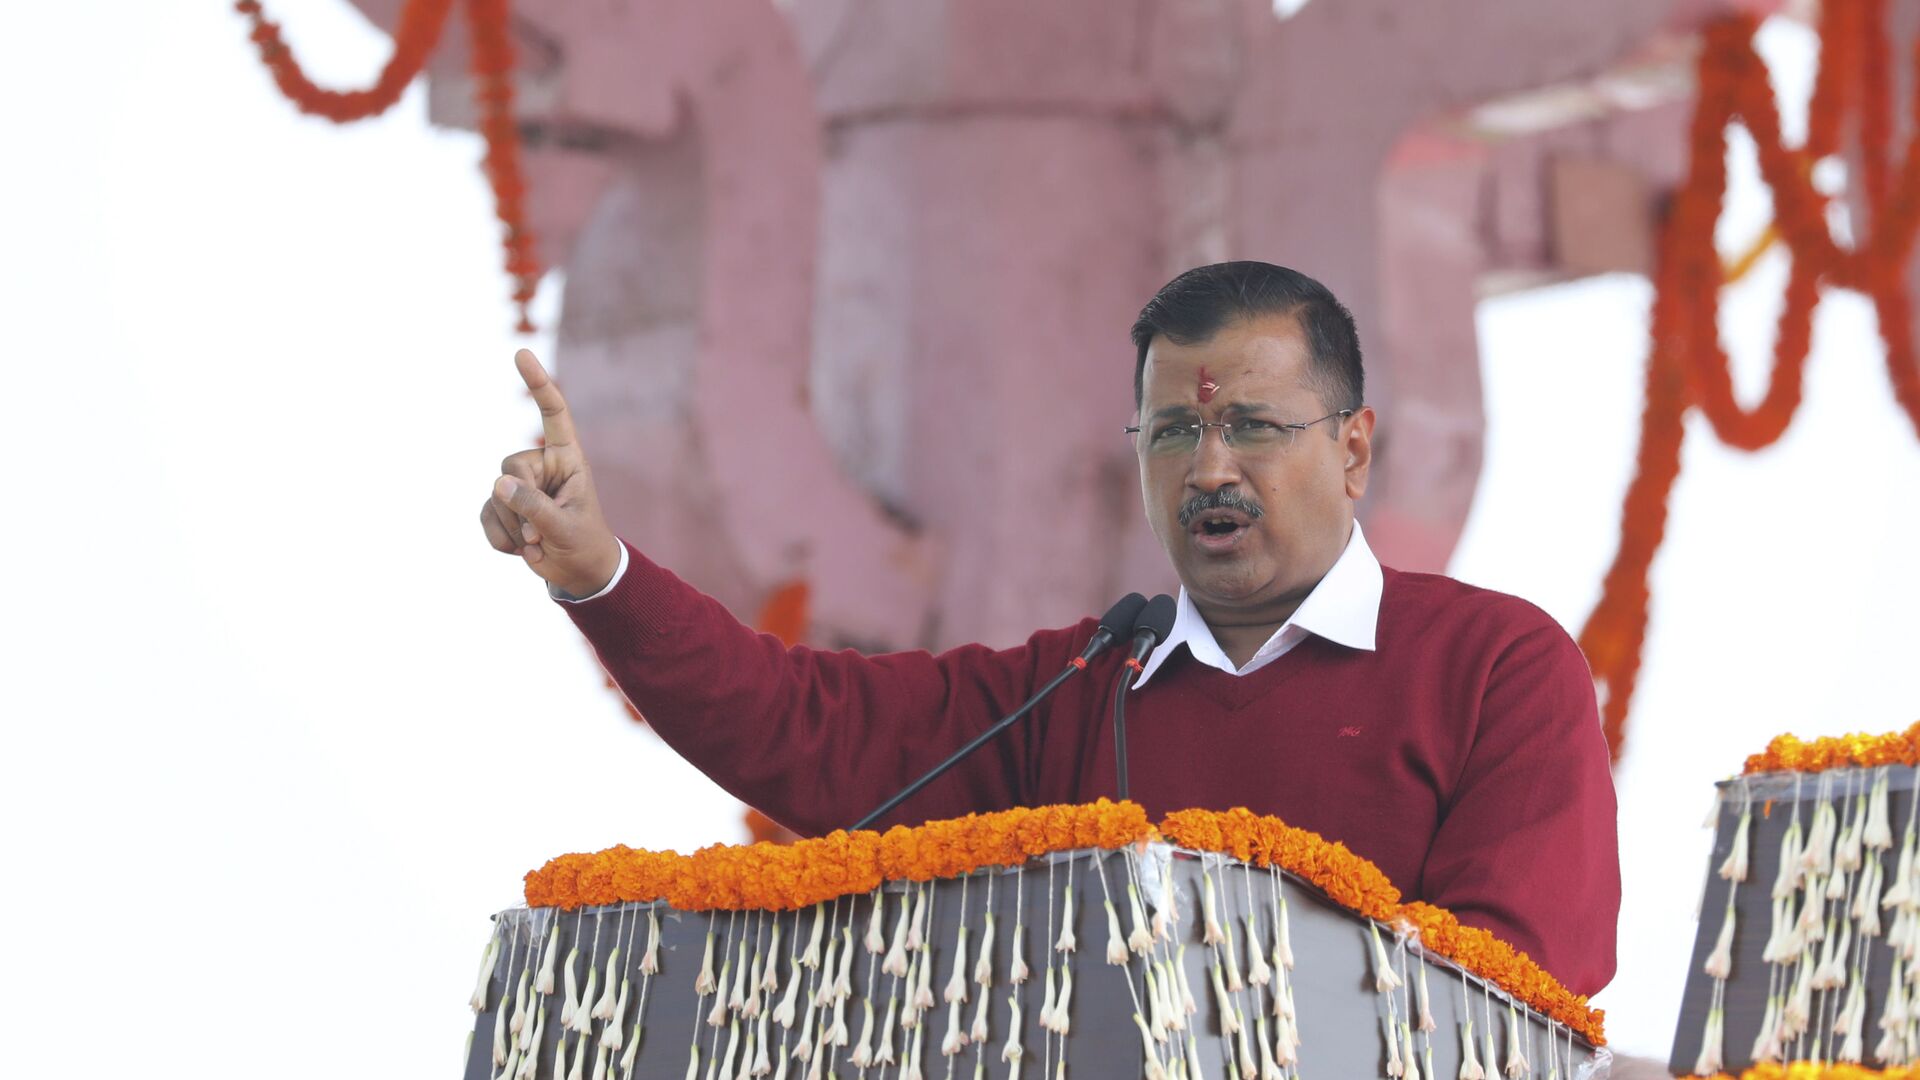 Aam Aadmi Party, or Common Man's Party, leader Arvind Kejriwal addresses the crowd after taking oath as Chief Minister of Delhi for the third time, in New Delhi, India, Sunday, Feb. 16, 2020 - Sputnik International, 1920, 24.09.2021